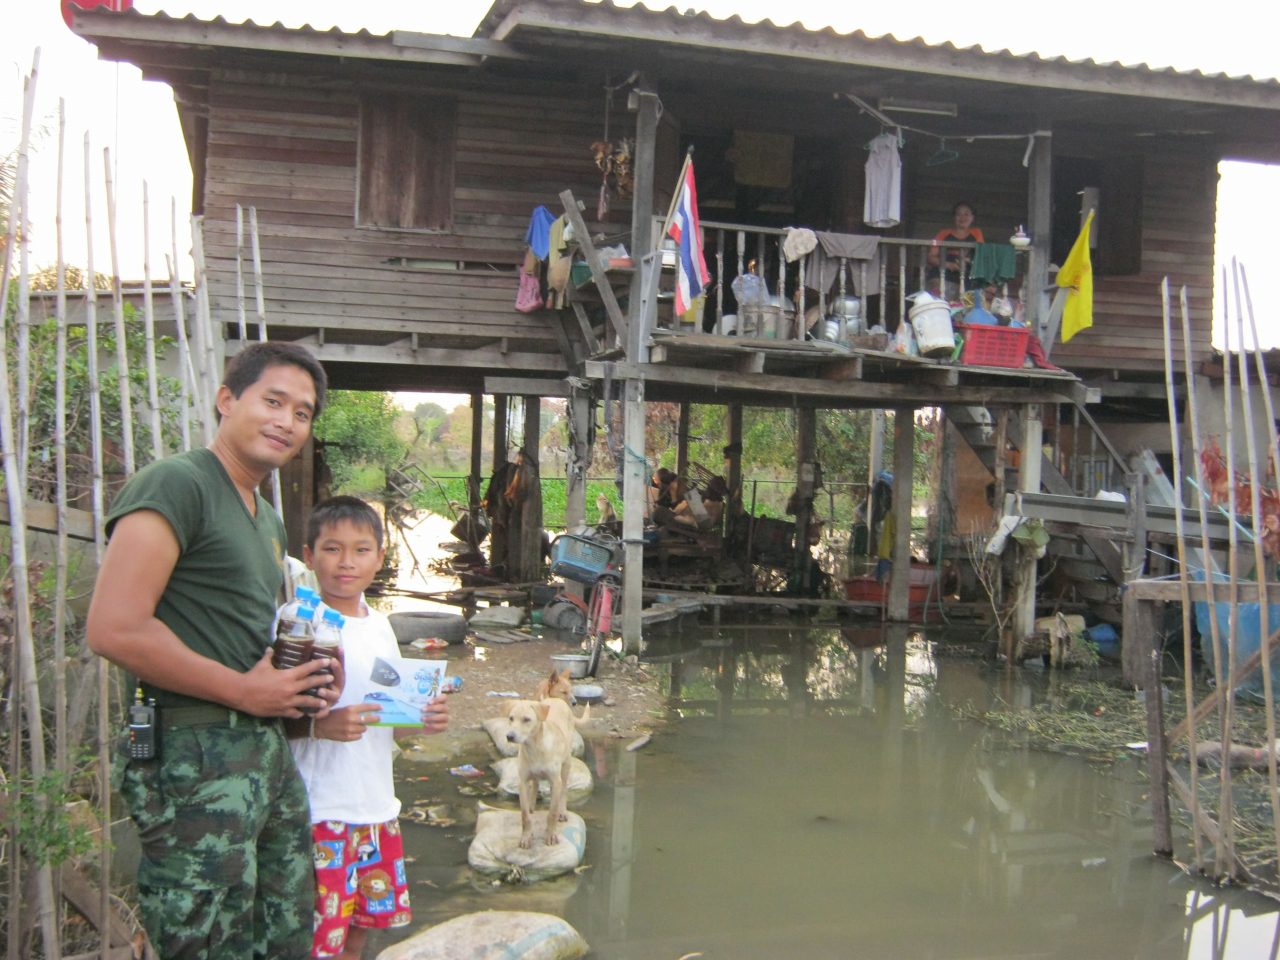 Supplying AEM to isolated people affected by the flood